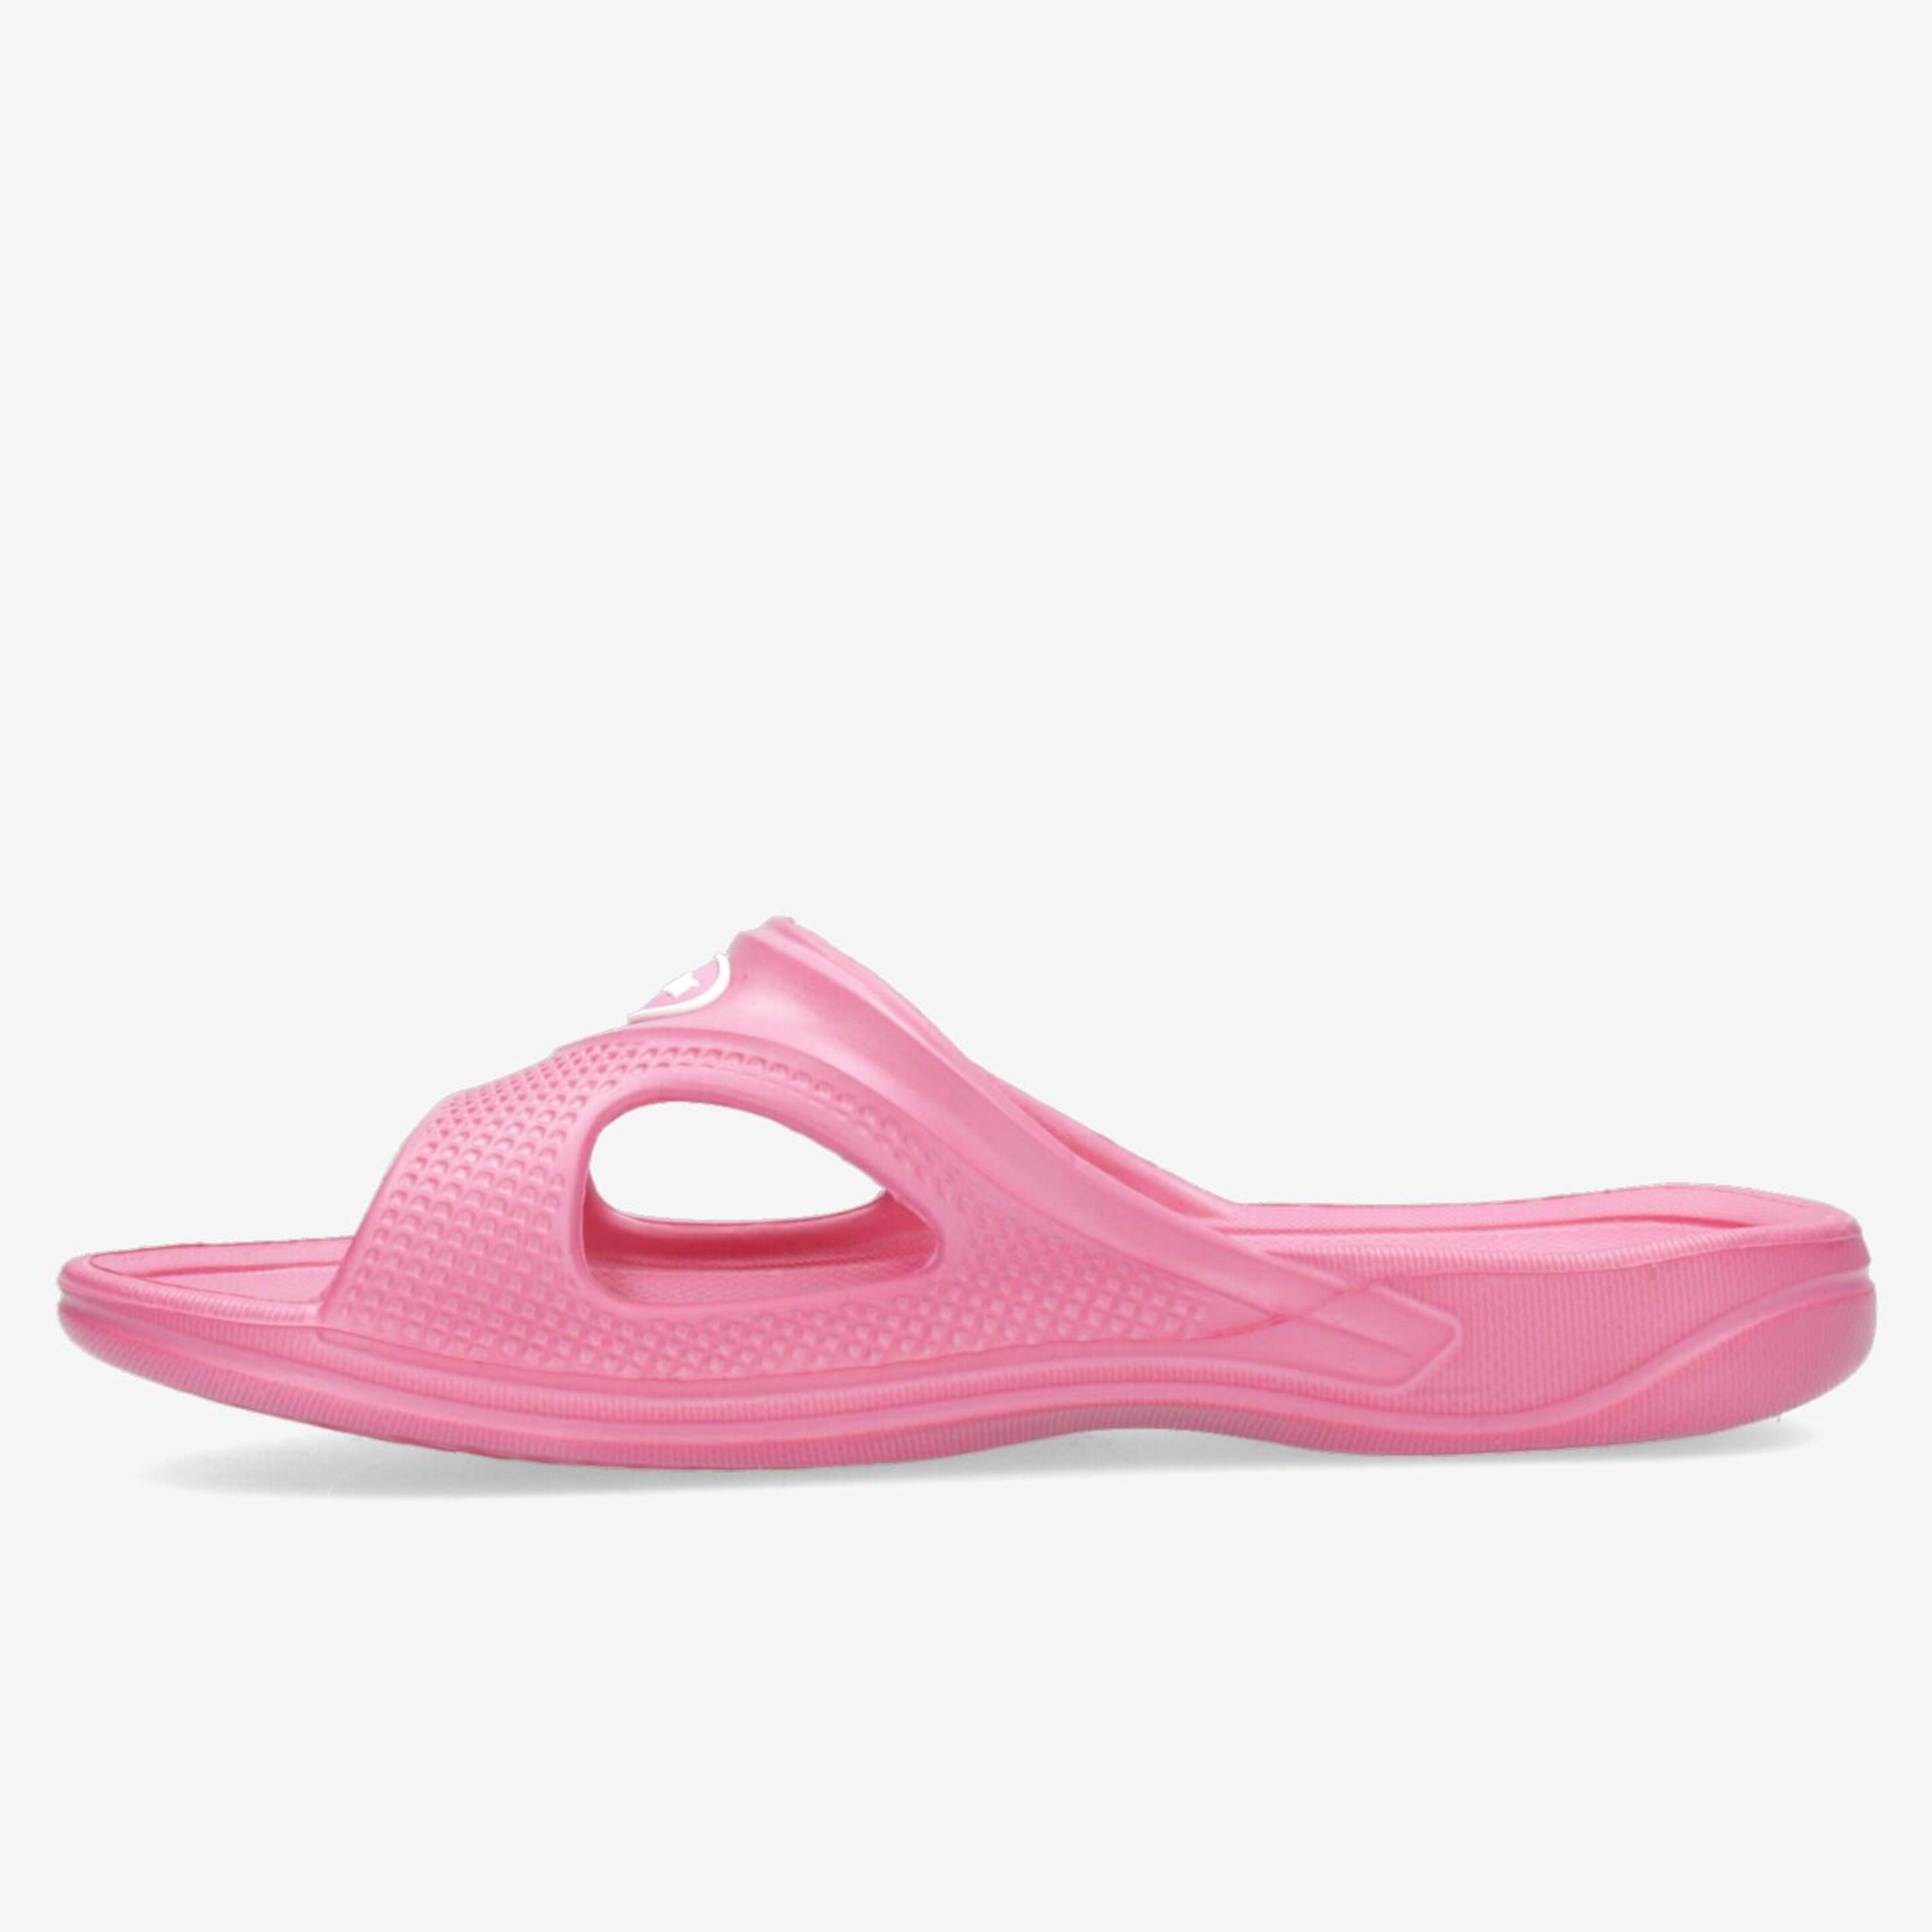 Ankor Done - Rosa - Chanclas Mujer